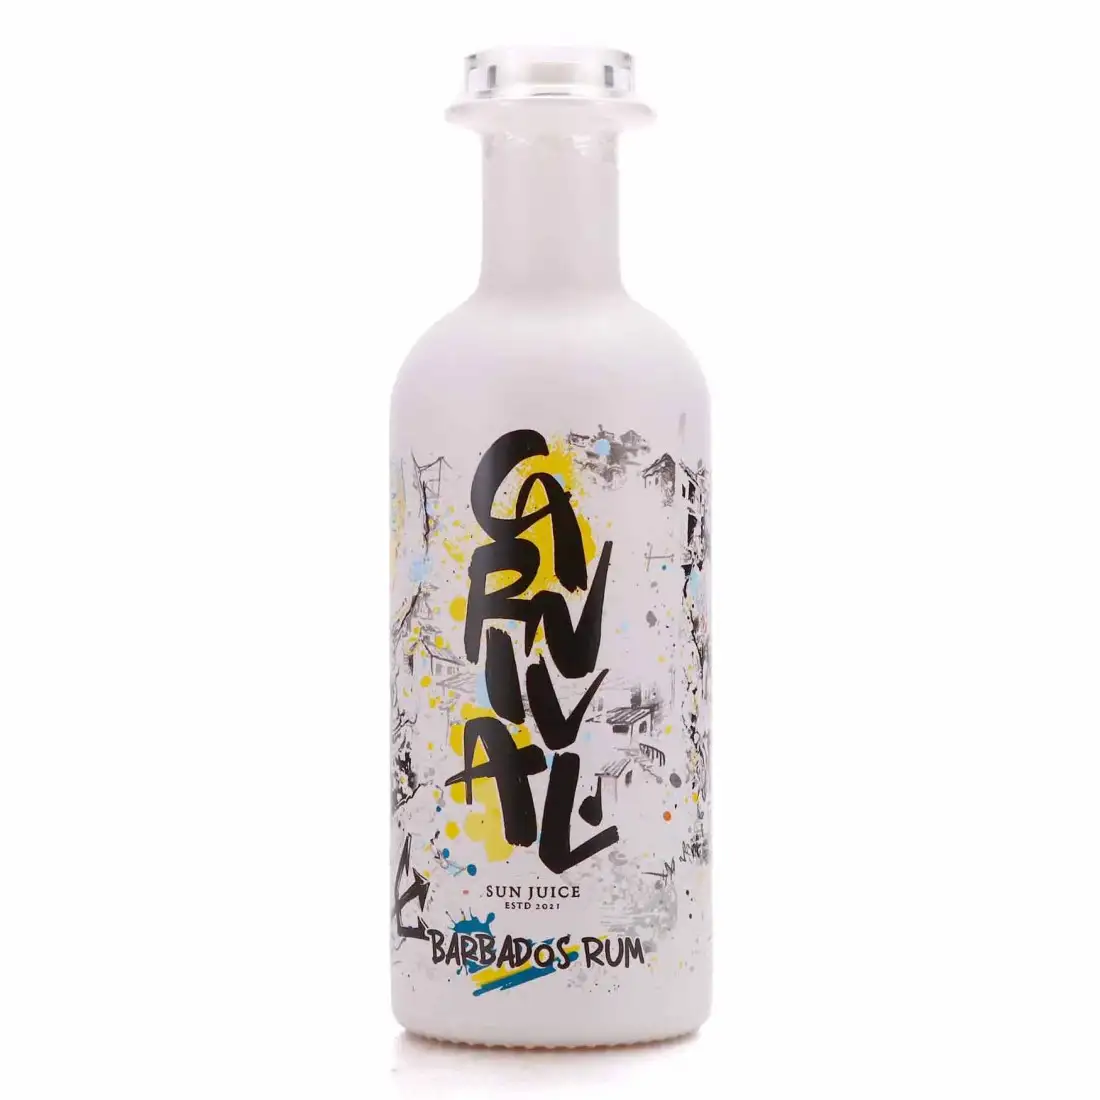 Image of the front of the bottle of the rum Carnival Barbados Rum